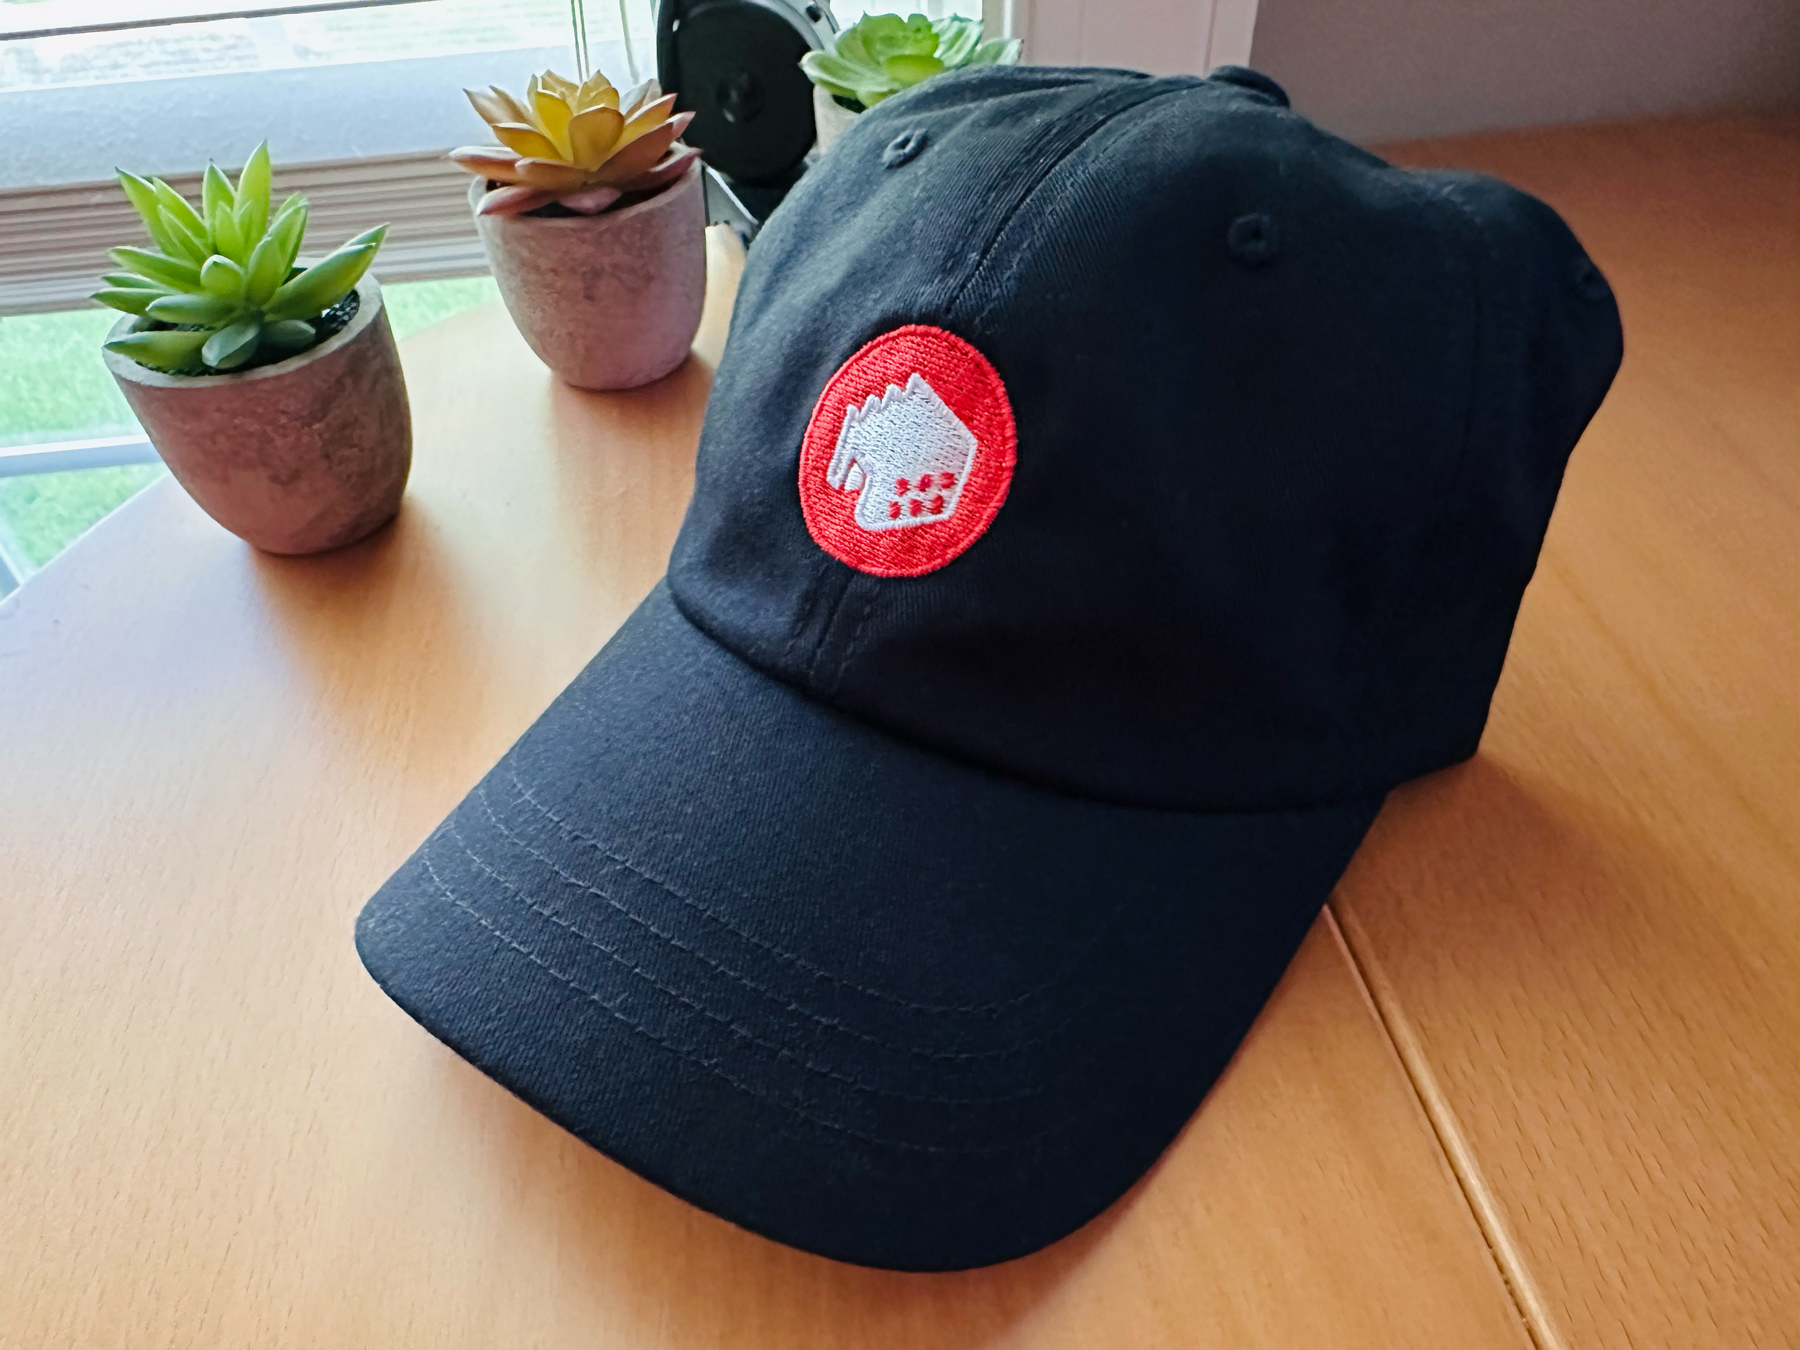 A black baseball cap sitting on a wood desk embroidered with the red and white logo of The Iconfactory.